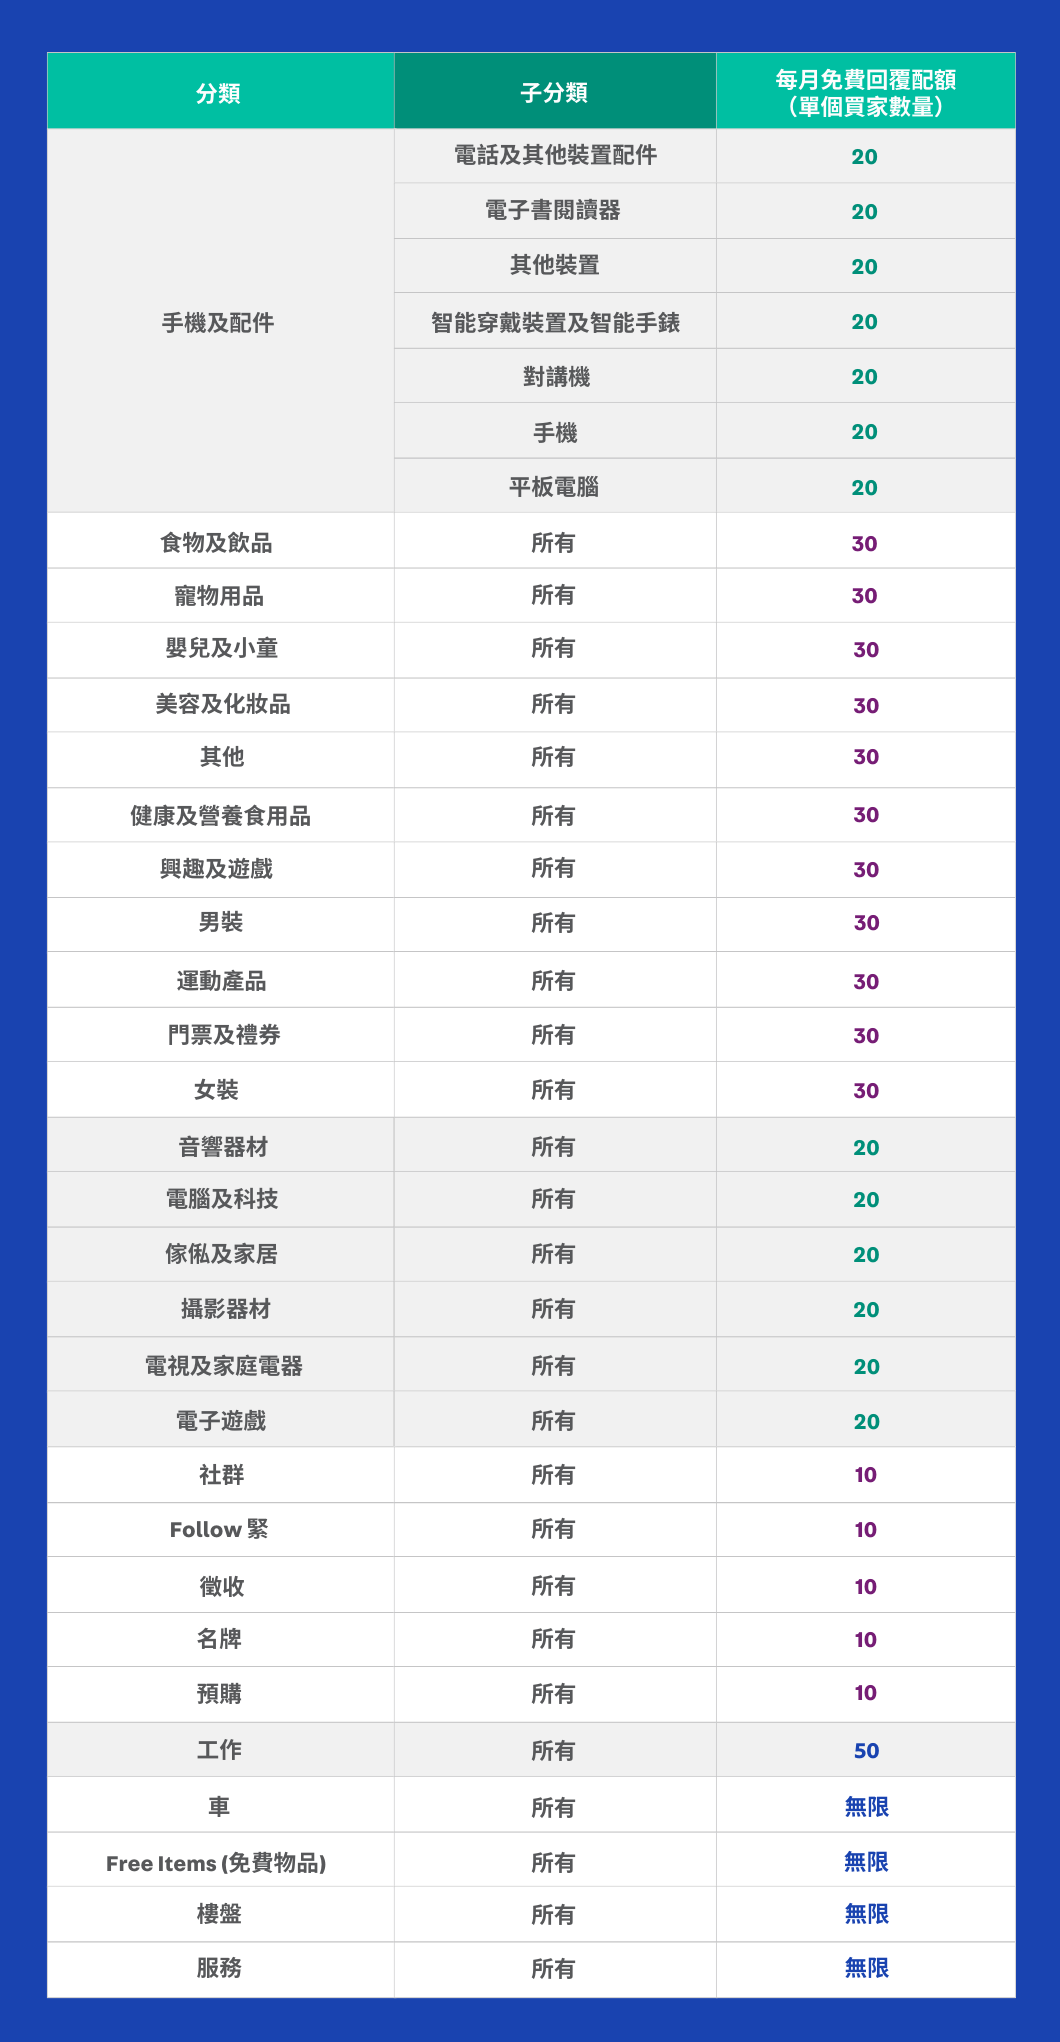 HK_ReplyQuota_Table_1 NEW (2).png